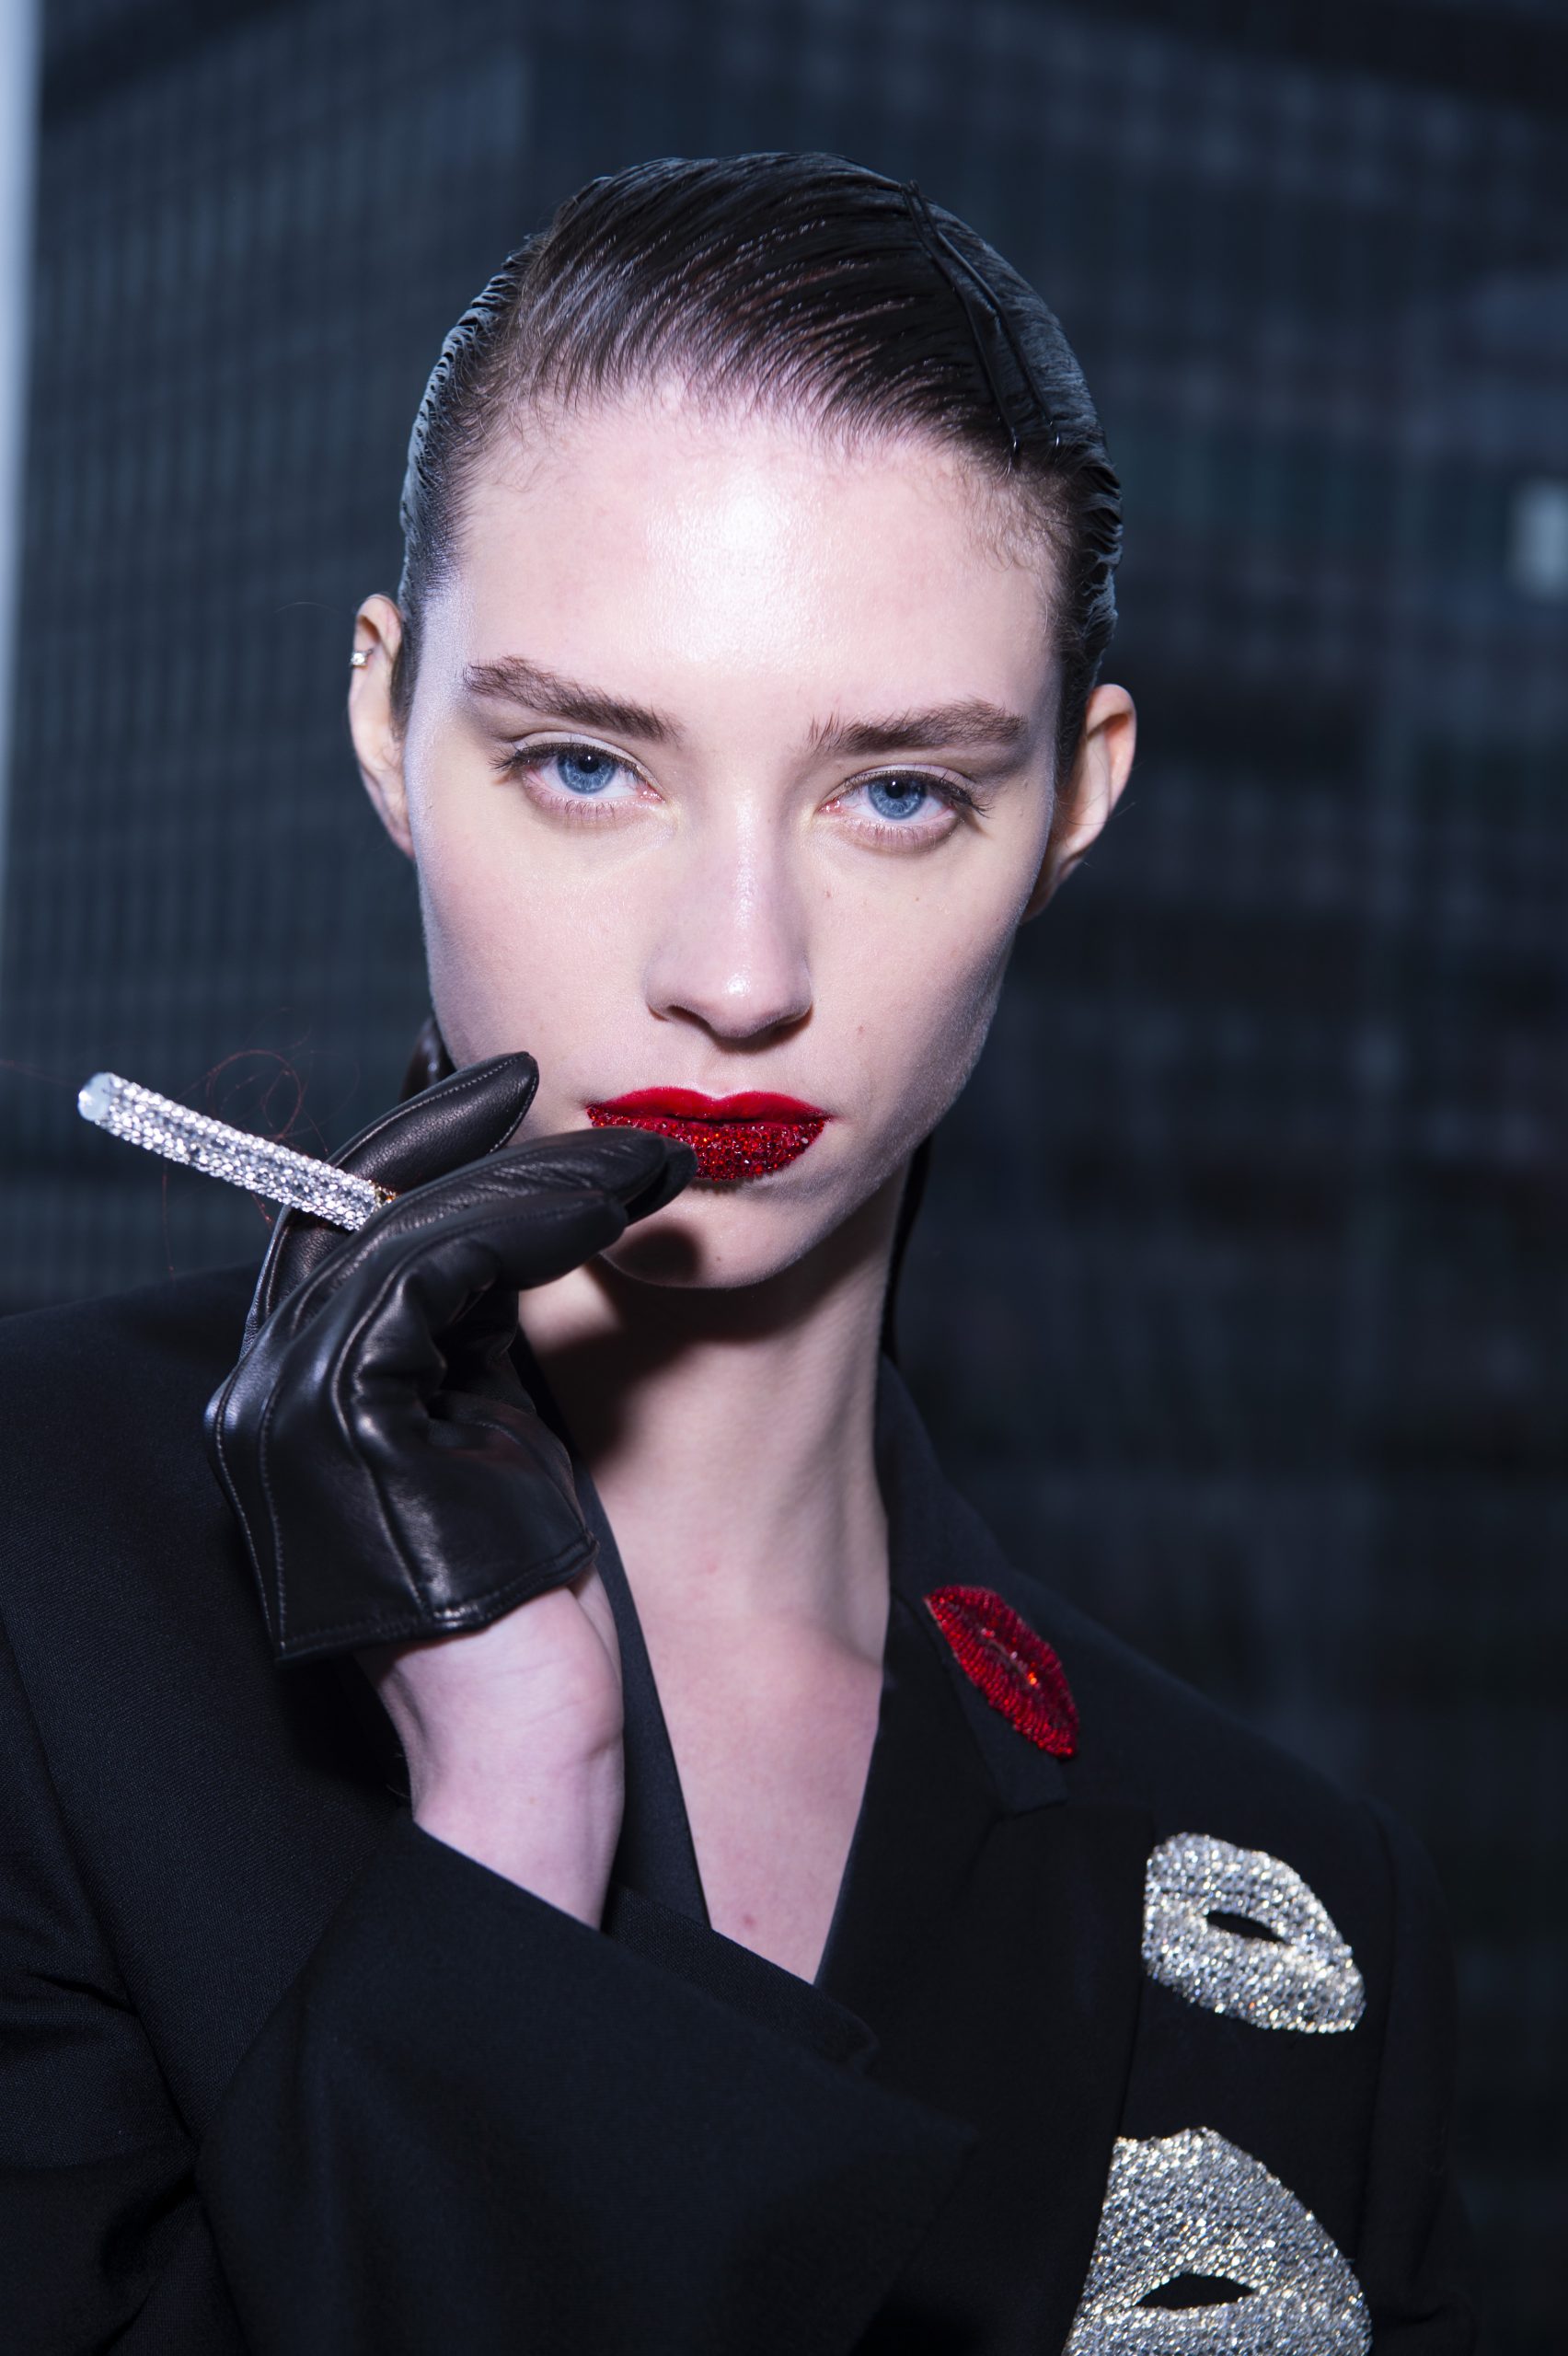 Model wearing red lipstick and leather gloves